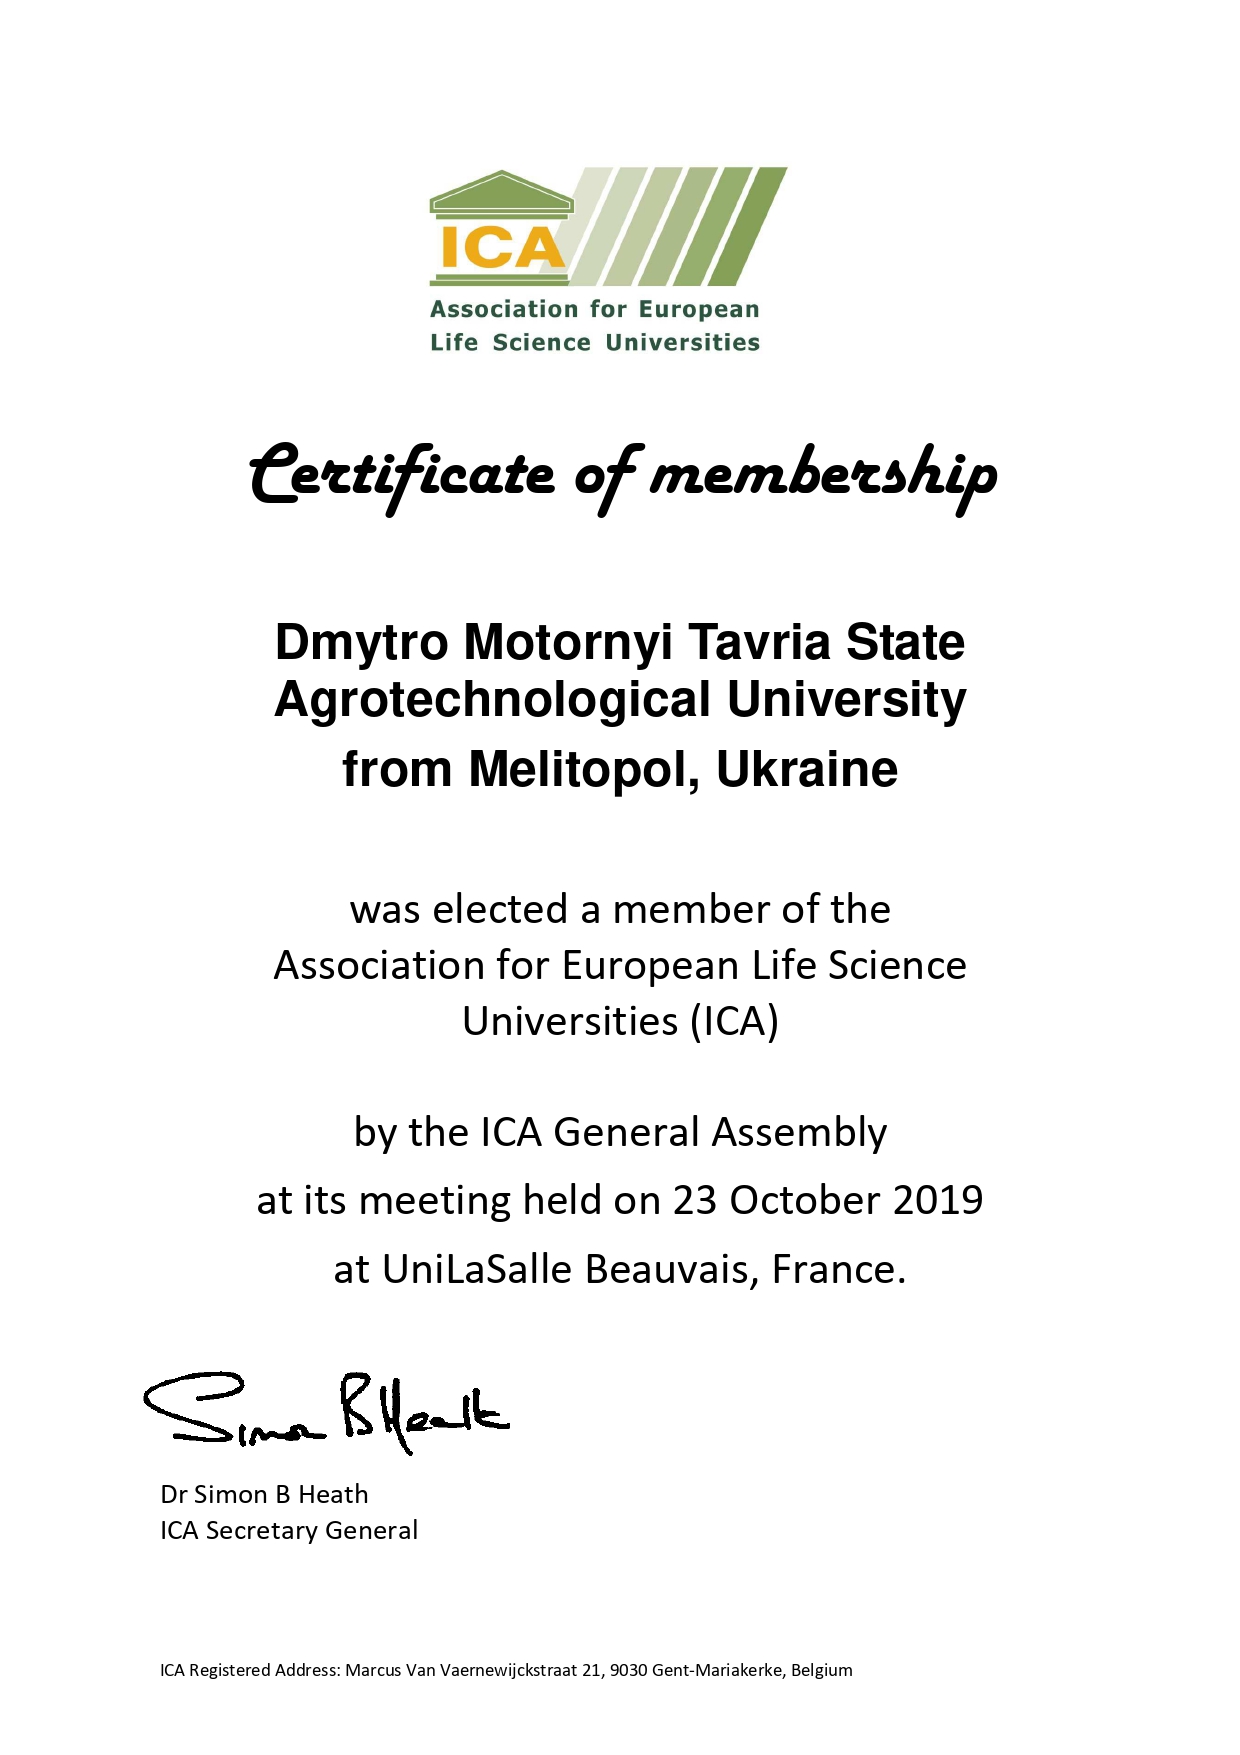 Dmytro_Motornyi_Tavria_State_Agrotechnological_University_ICA_membership_certificate_member_2019 (1)_page-0001